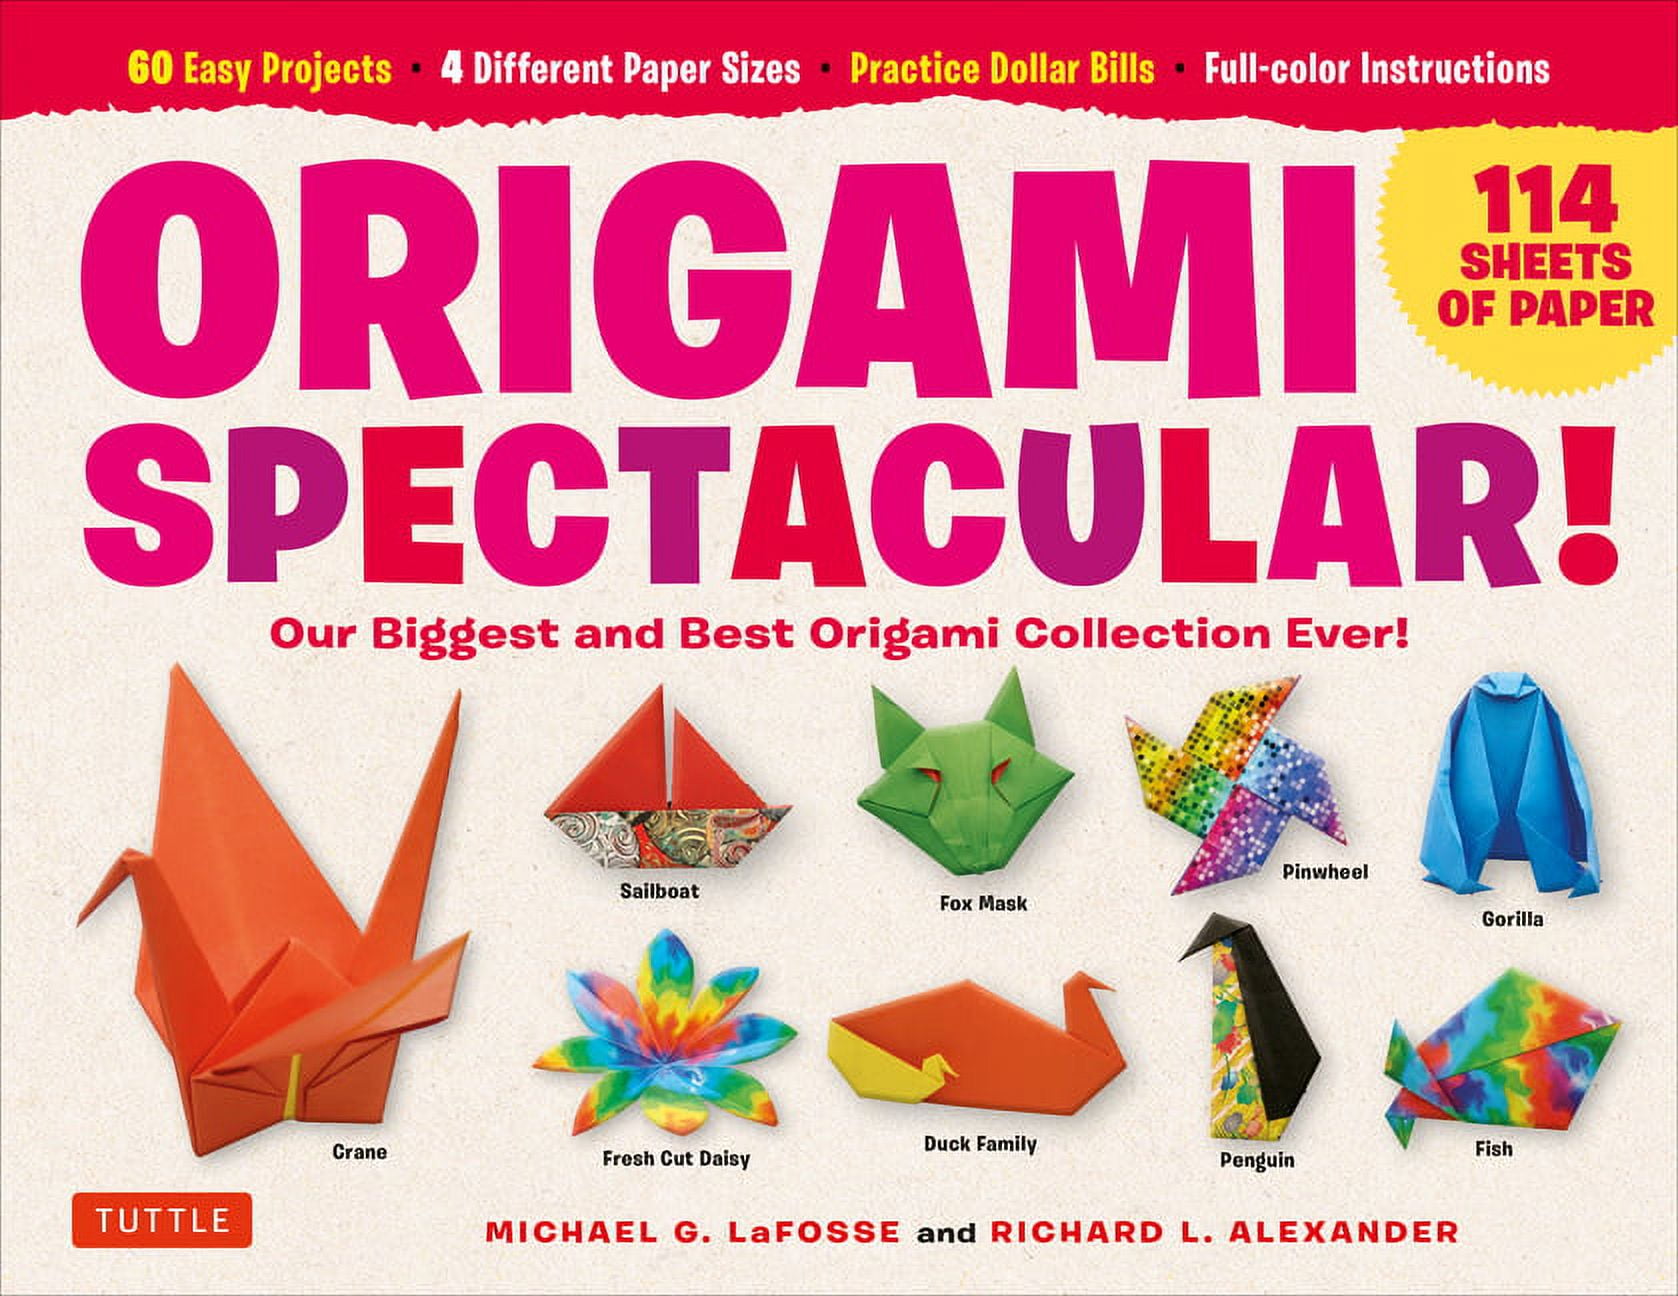 Origami For Kids: Incredibly Easy Step-by-Step Instructions to create 30  Amazing Paper-Folding Models in Less Than 60 Seconds. With Fant (Paperback)